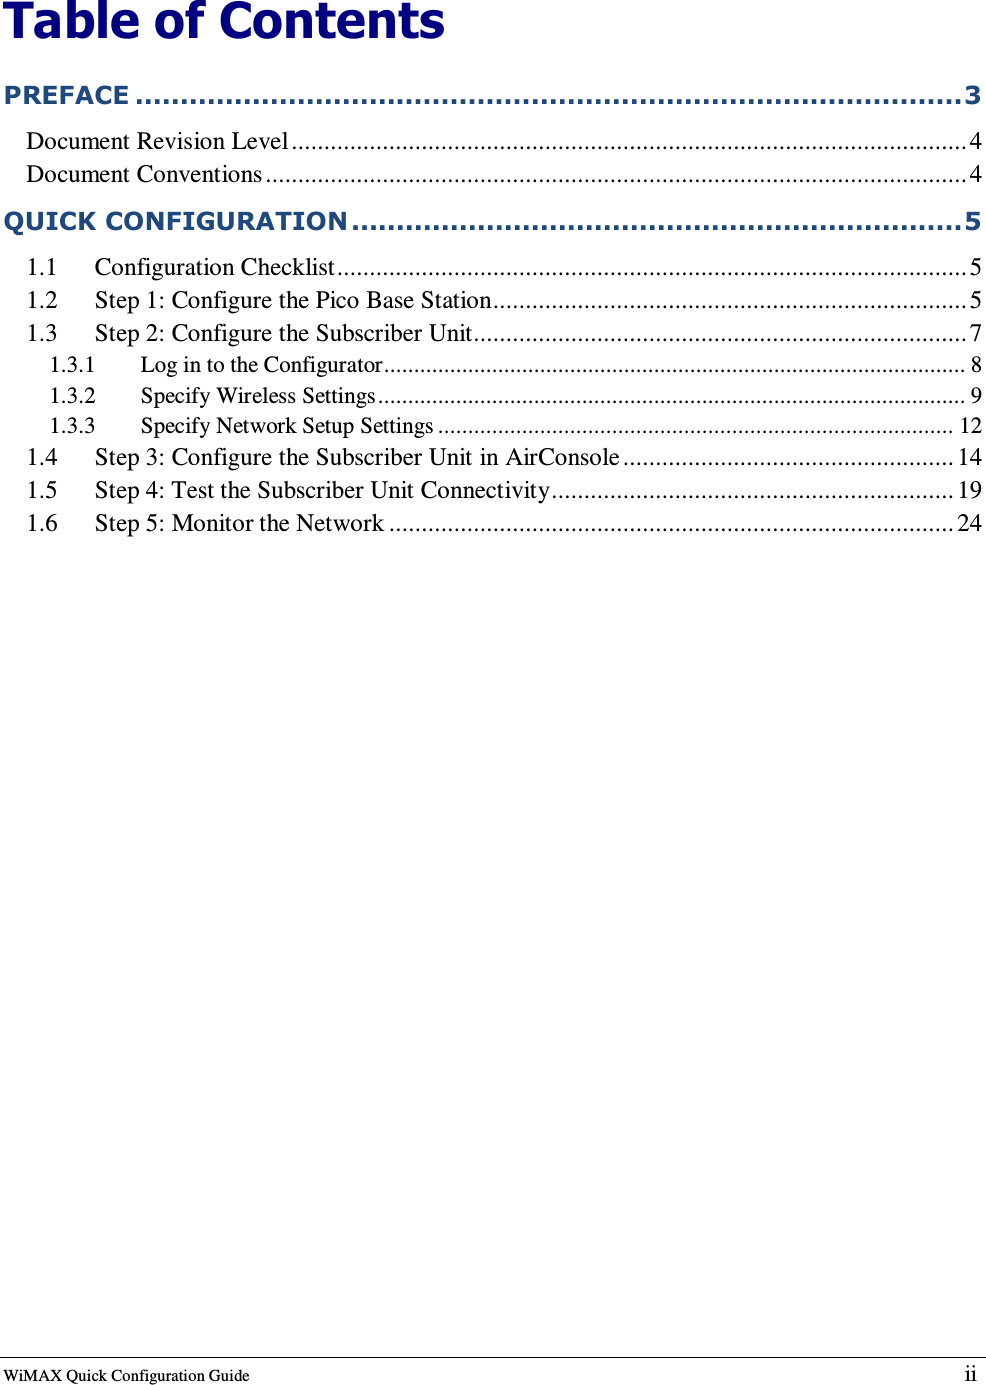  WiMAX Quick Configuration Guide   ii    Table of Contents PREFACE ............................................................................................3 Document Revision Level........................................................................................................4 Document Conventions............................................................................................................4 QUICK CONFIGURATION....................................................................5 1.1 Configuration Checklist................................................................................................. 5 1.2 Step 1: Configure the Pico Base Station.........................................................................5 1.3 Step 2: Configure the Subscriber Unit............................................................................7 1.3.1  Log in to the Configurator................................................................................................. 8 1.3.2  Specify Wireless Settings.................................................................................................. 9 1.3.3  Specify Network Setup Settings ...................................................................................... 12 1.4 Step 3: Configure the Subscriber Unit in AirConsole................................................... 14 1.5 Step 4: Test the Subscriber Unit Connectivity.............................................................. 19 1.6 Step 5: Monitor the Network ....................................................................................... 24 